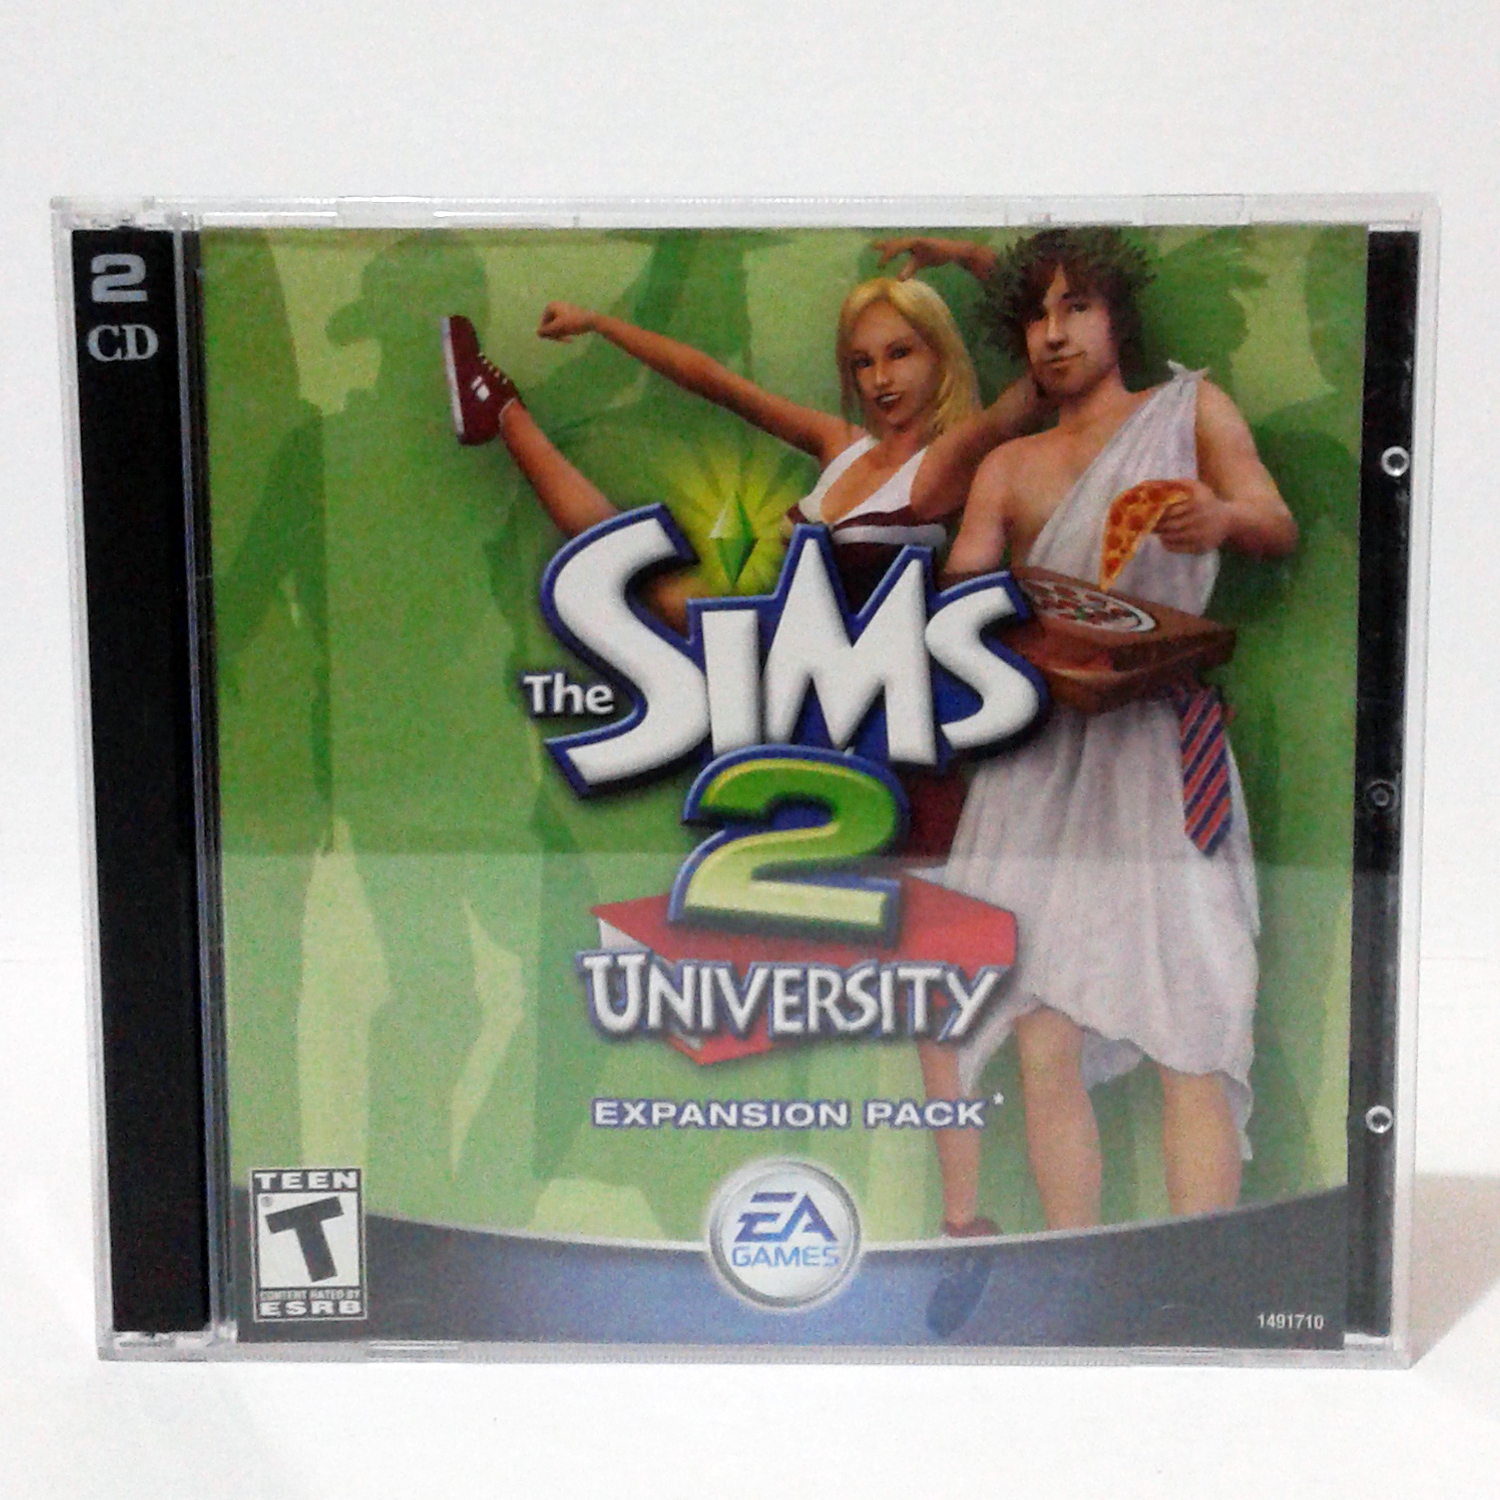 sims 2 expansion packs compatibility